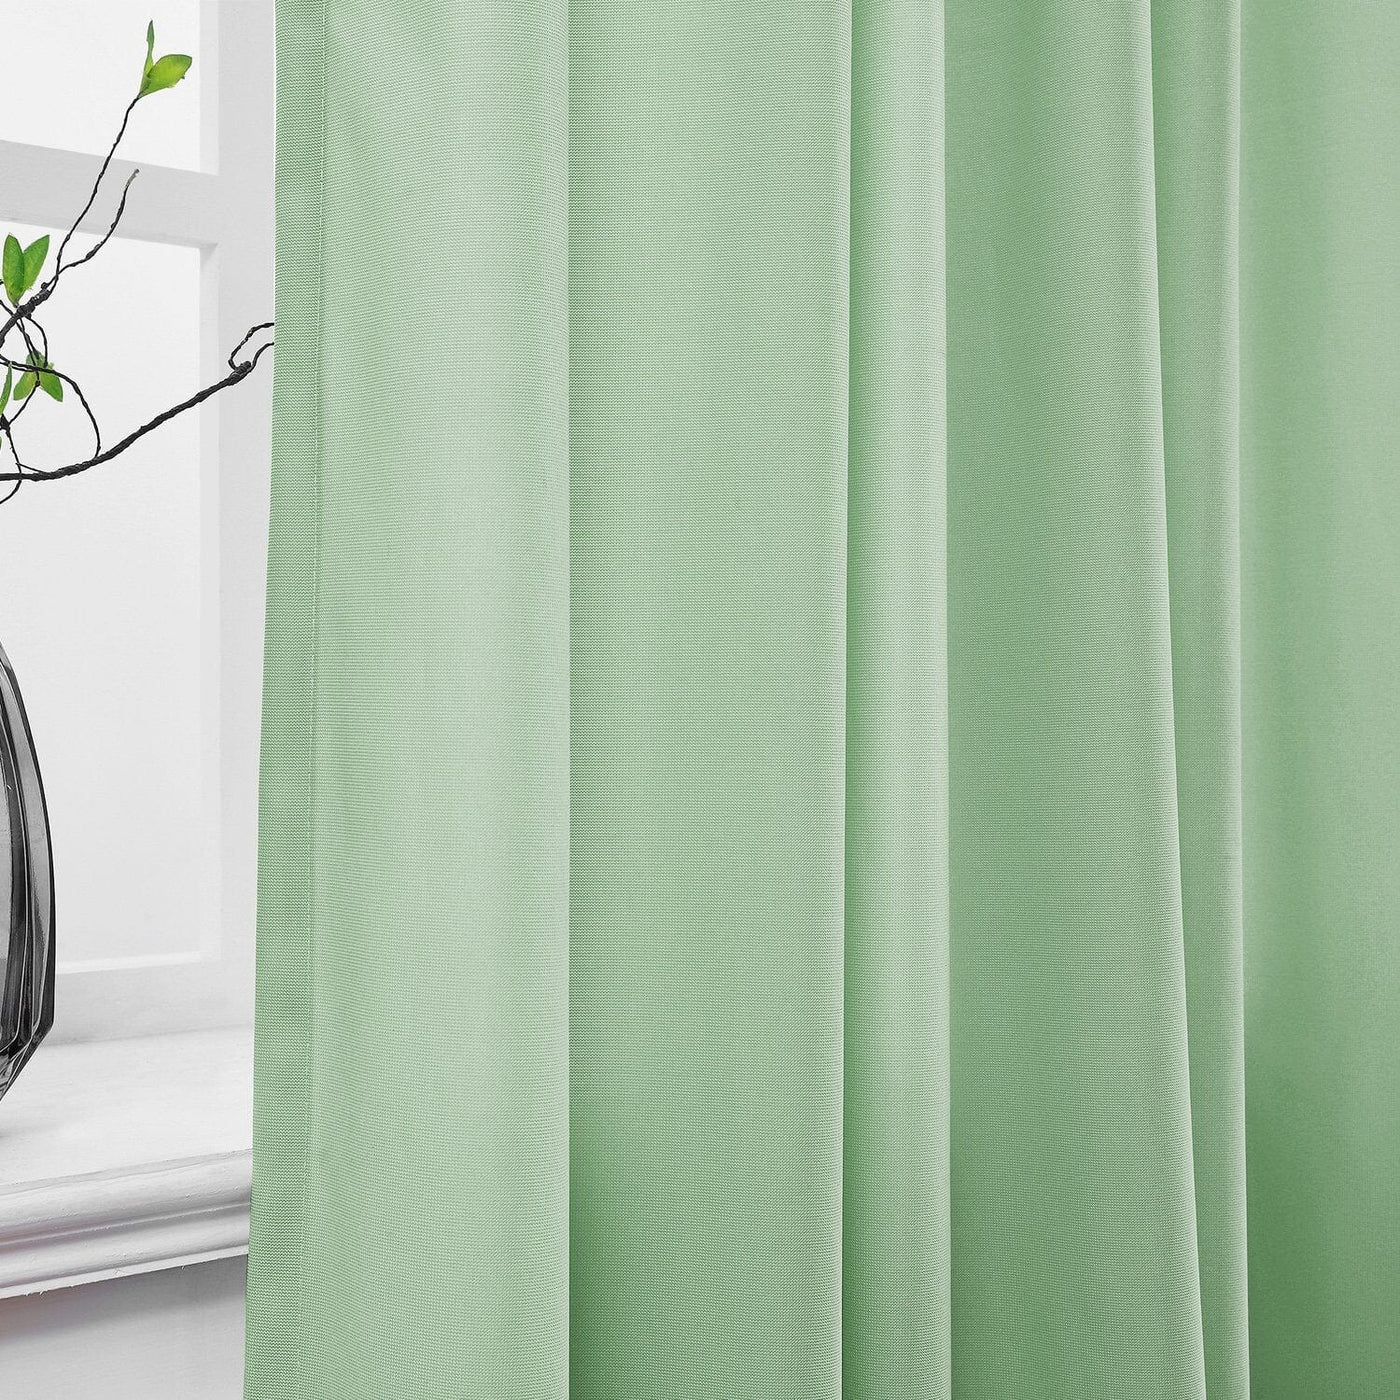 Flat Hook Hospital Clinic SPA Lab Cubicle Curtain Divider Privacy Screen Track Cubicle - TWOPAGES CURTAINS